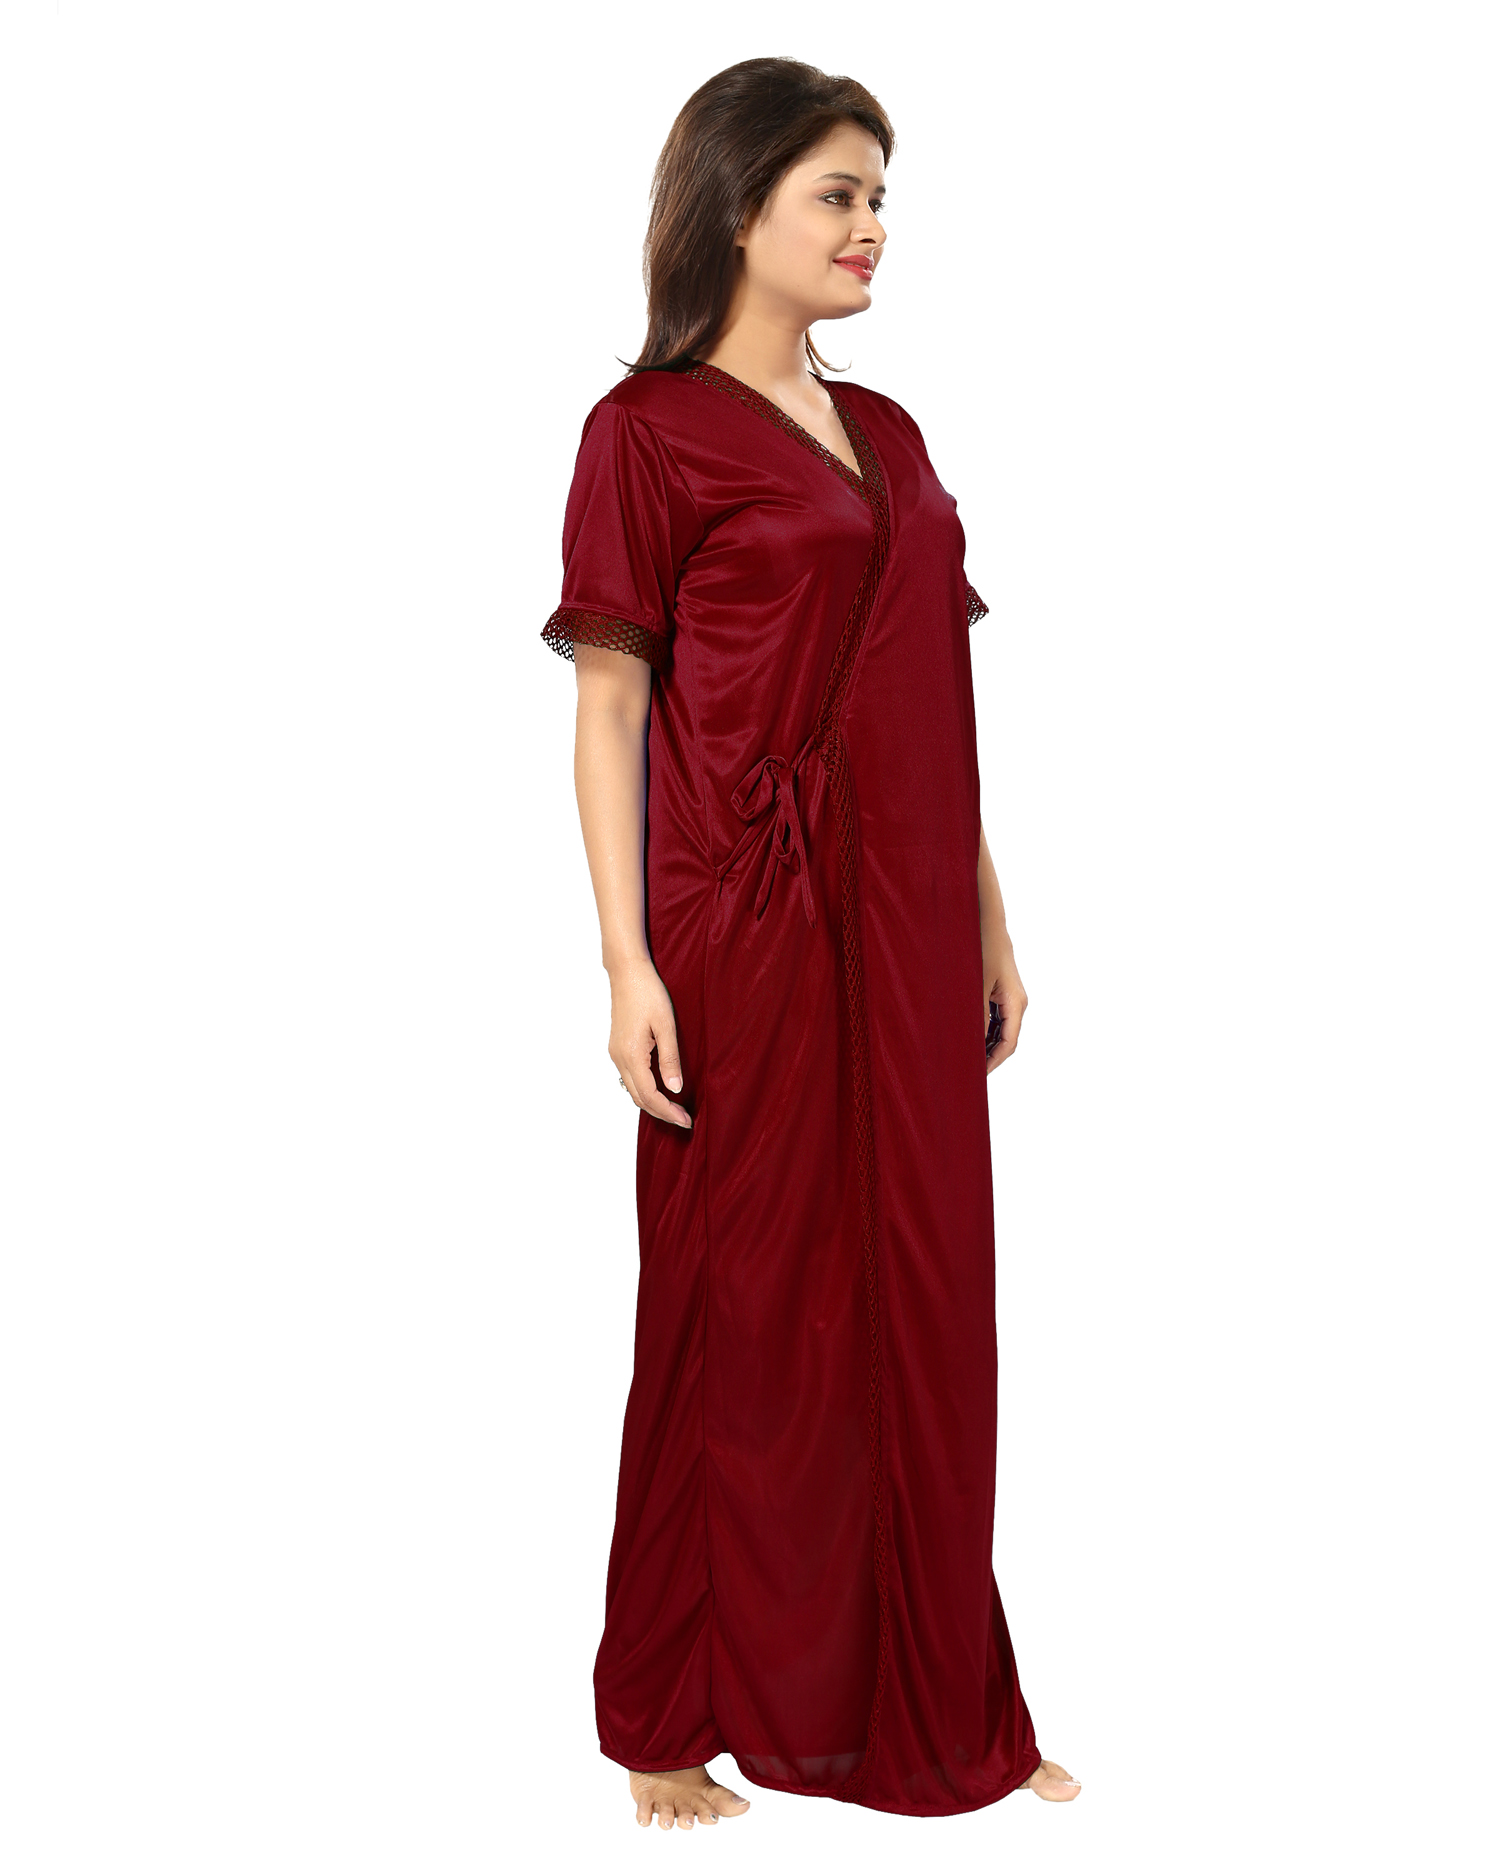 Buy Be You Maroon Solid Women Nighty with Robe Online @ ₹629 from ShopClues